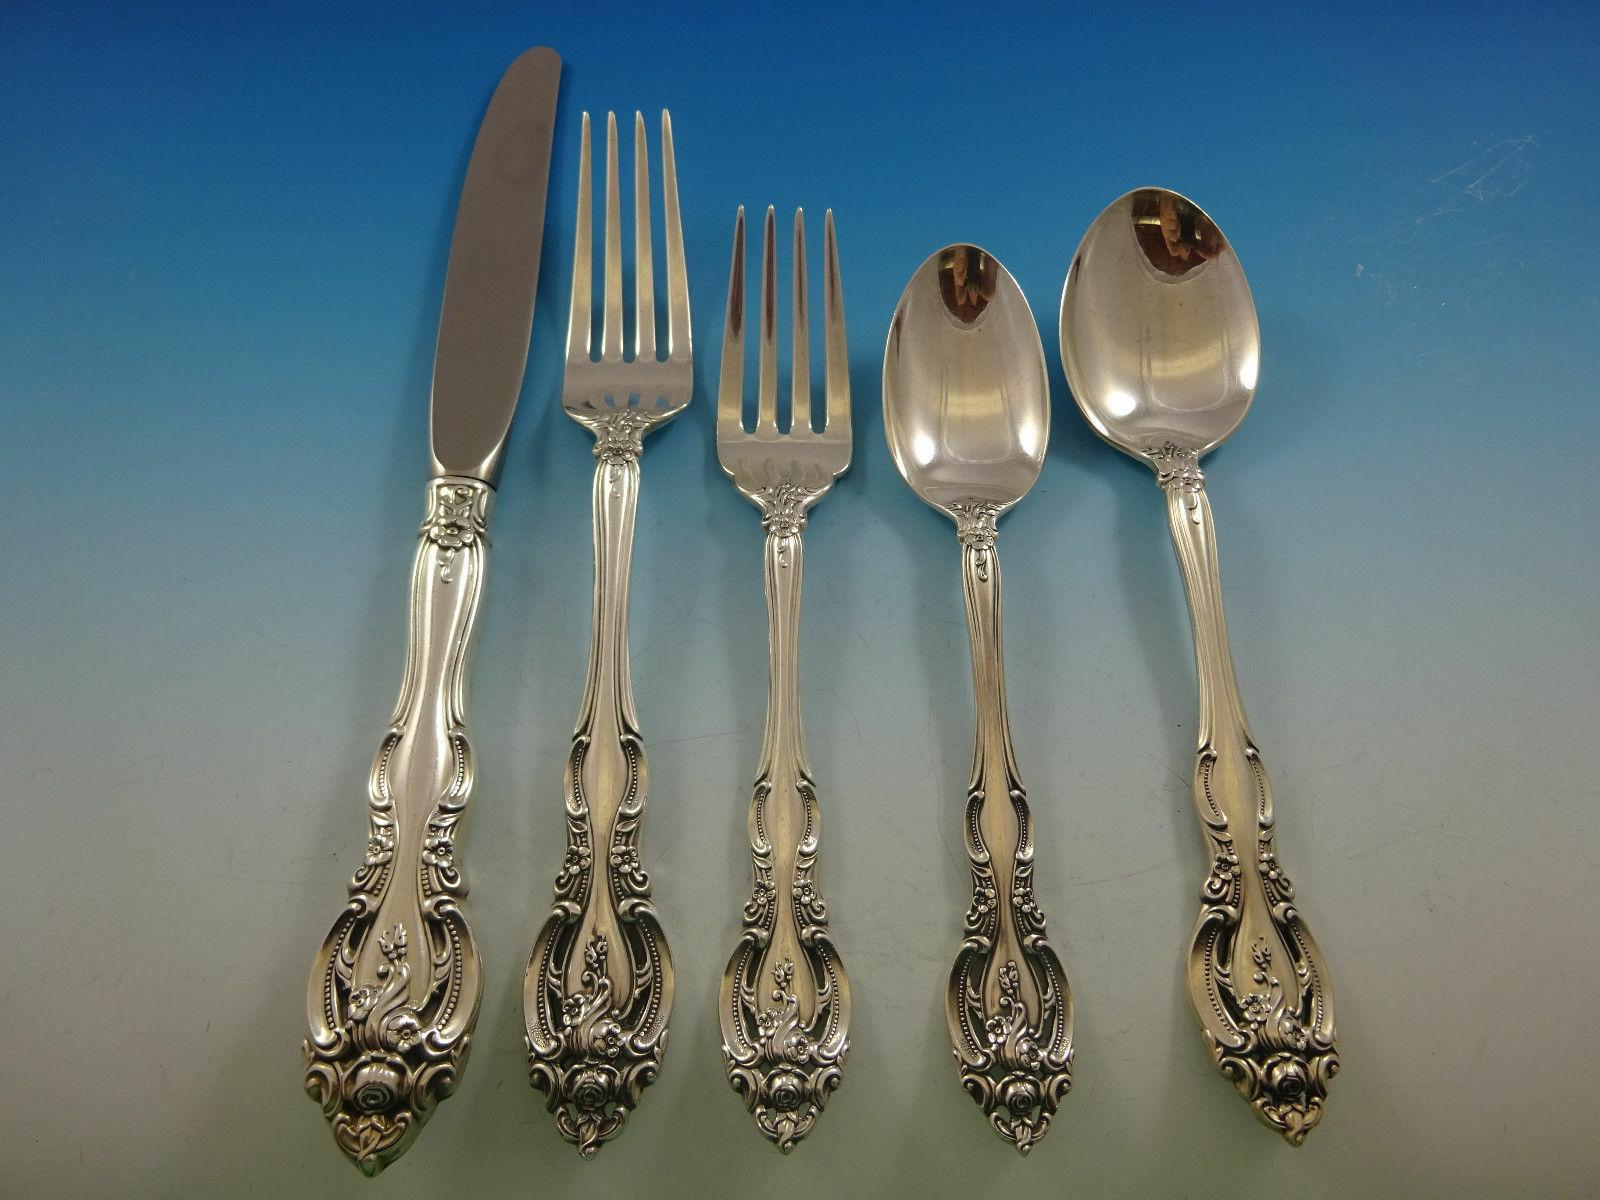 La Scala by Gorham sterling silver flatware set - 40 pieces. This set includes:

8 knives, 9